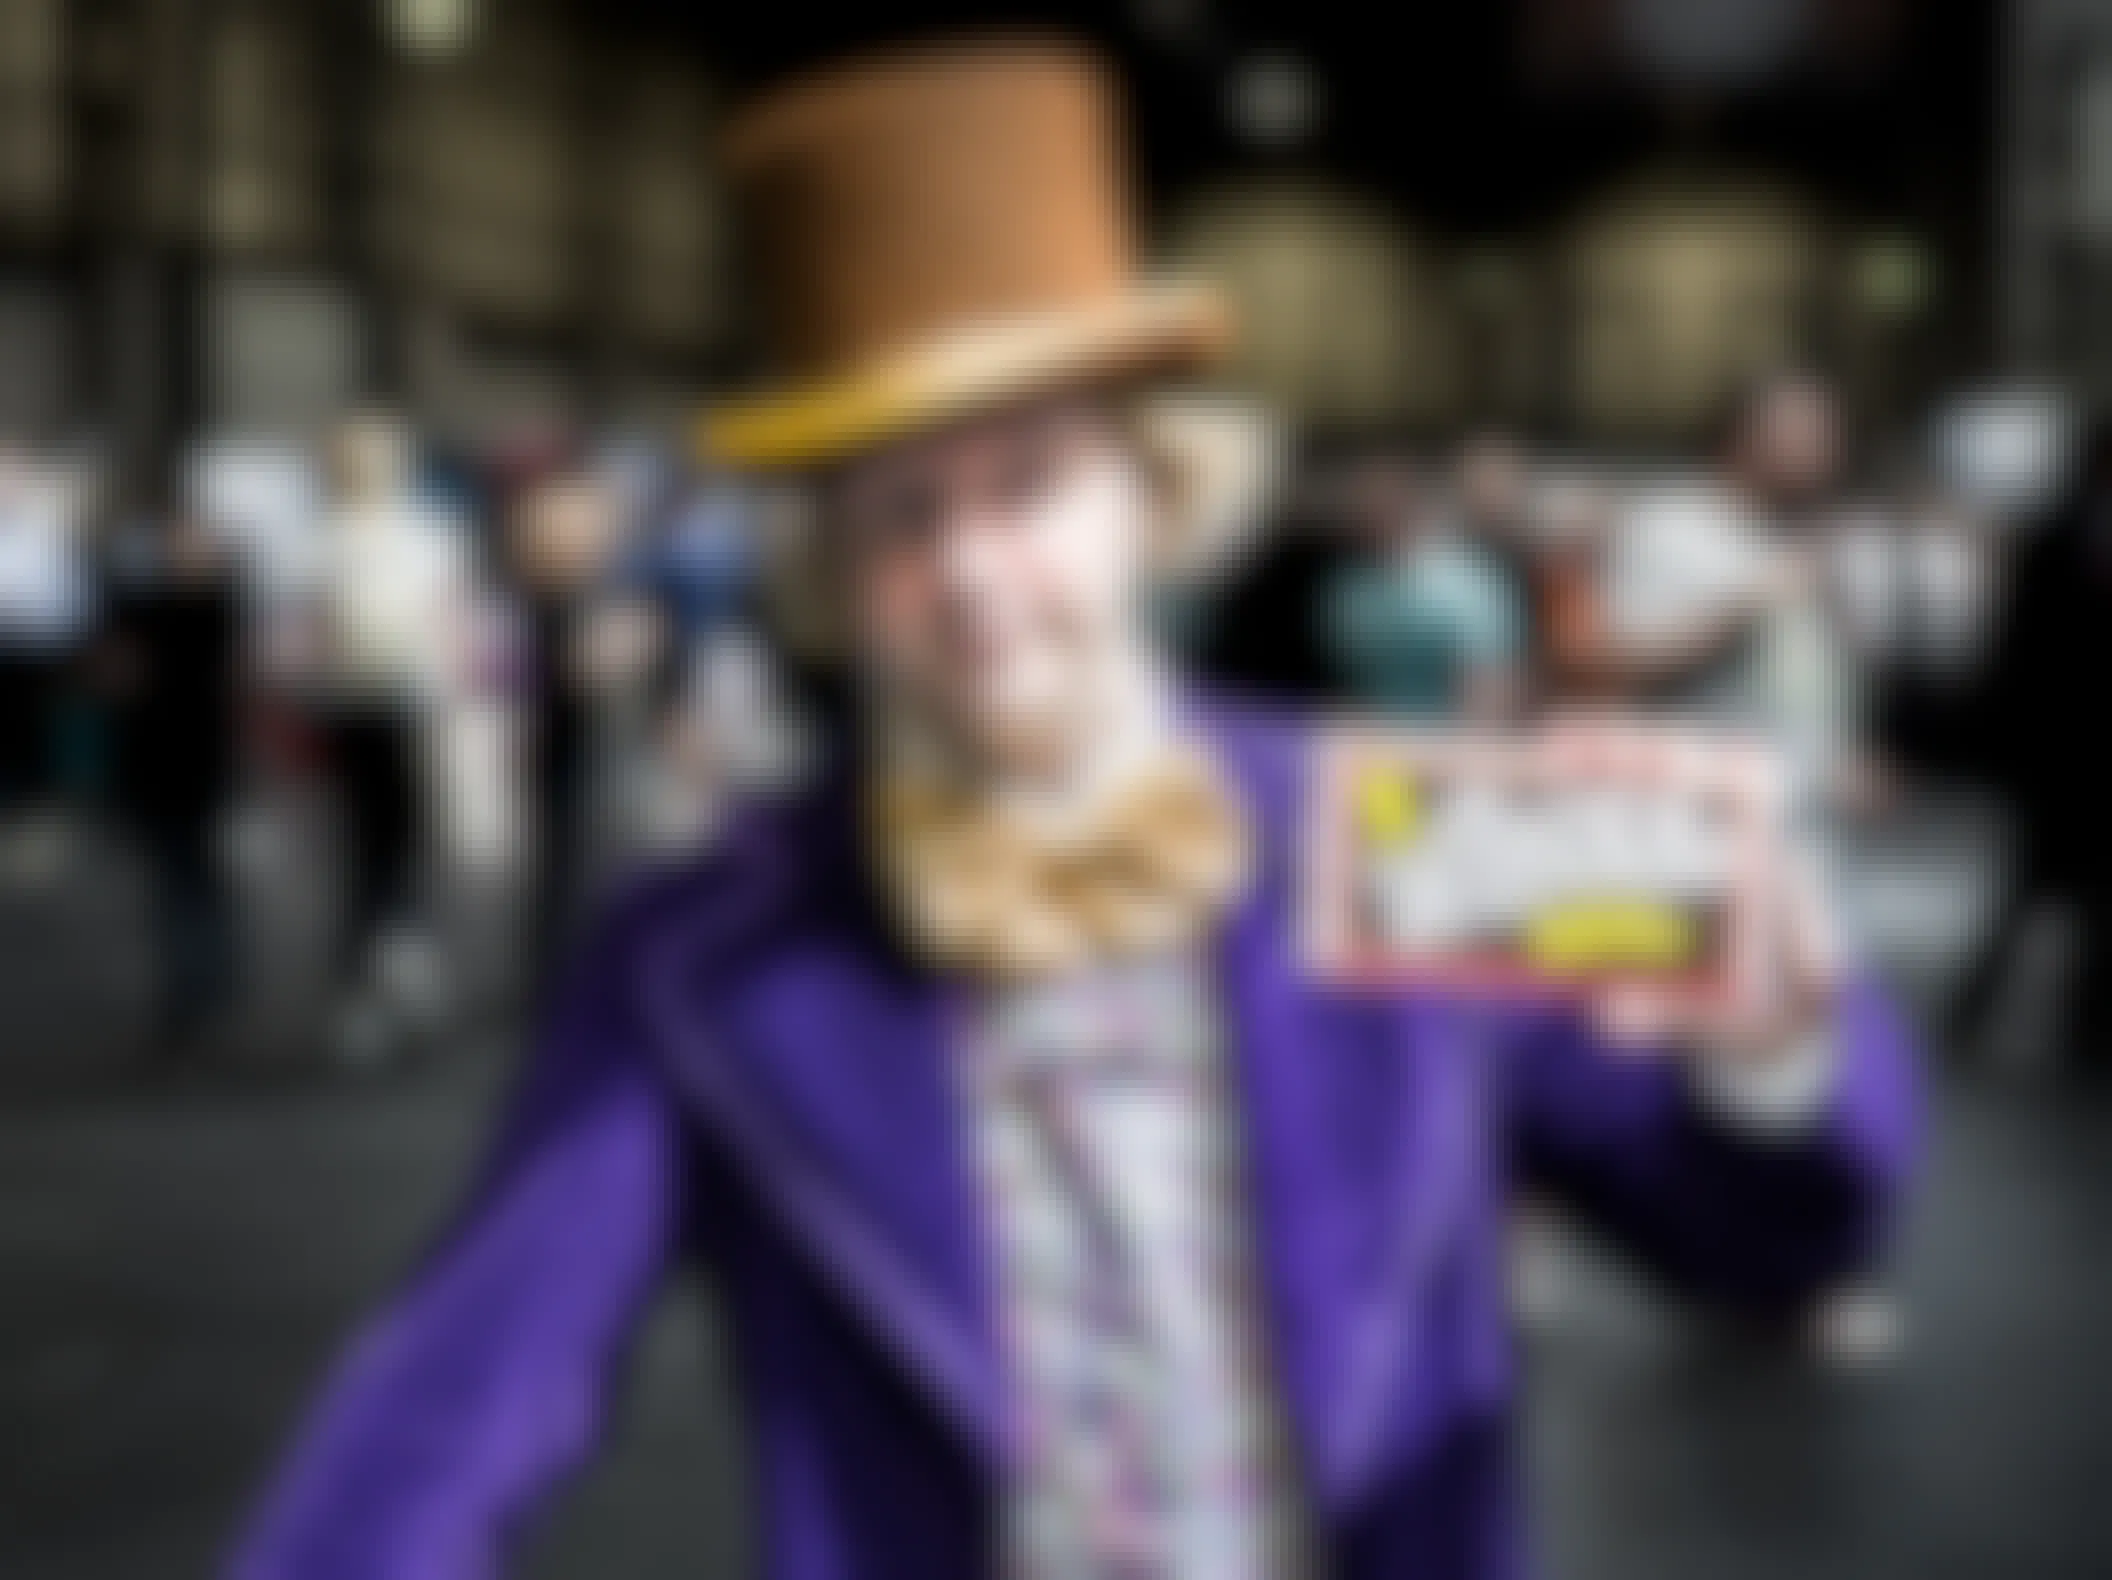 A man dressed as Willy Wonka holding up a chocolate bar.